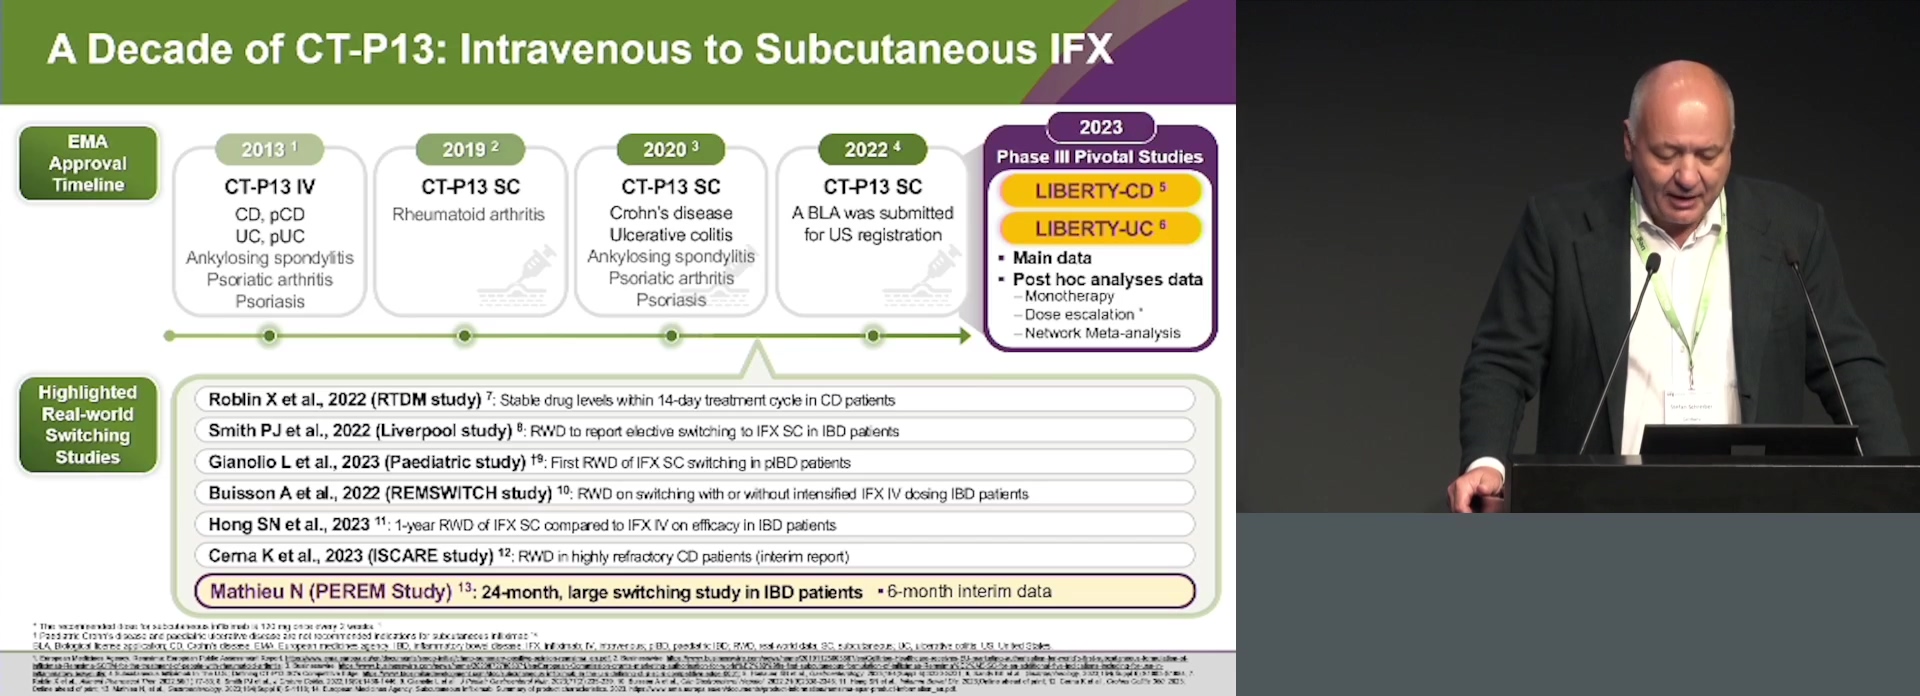 Refining the Journey in the Treatment of IBD with Subcutaneous Infliximab (Celltrion Healthcare) (Complete Session)